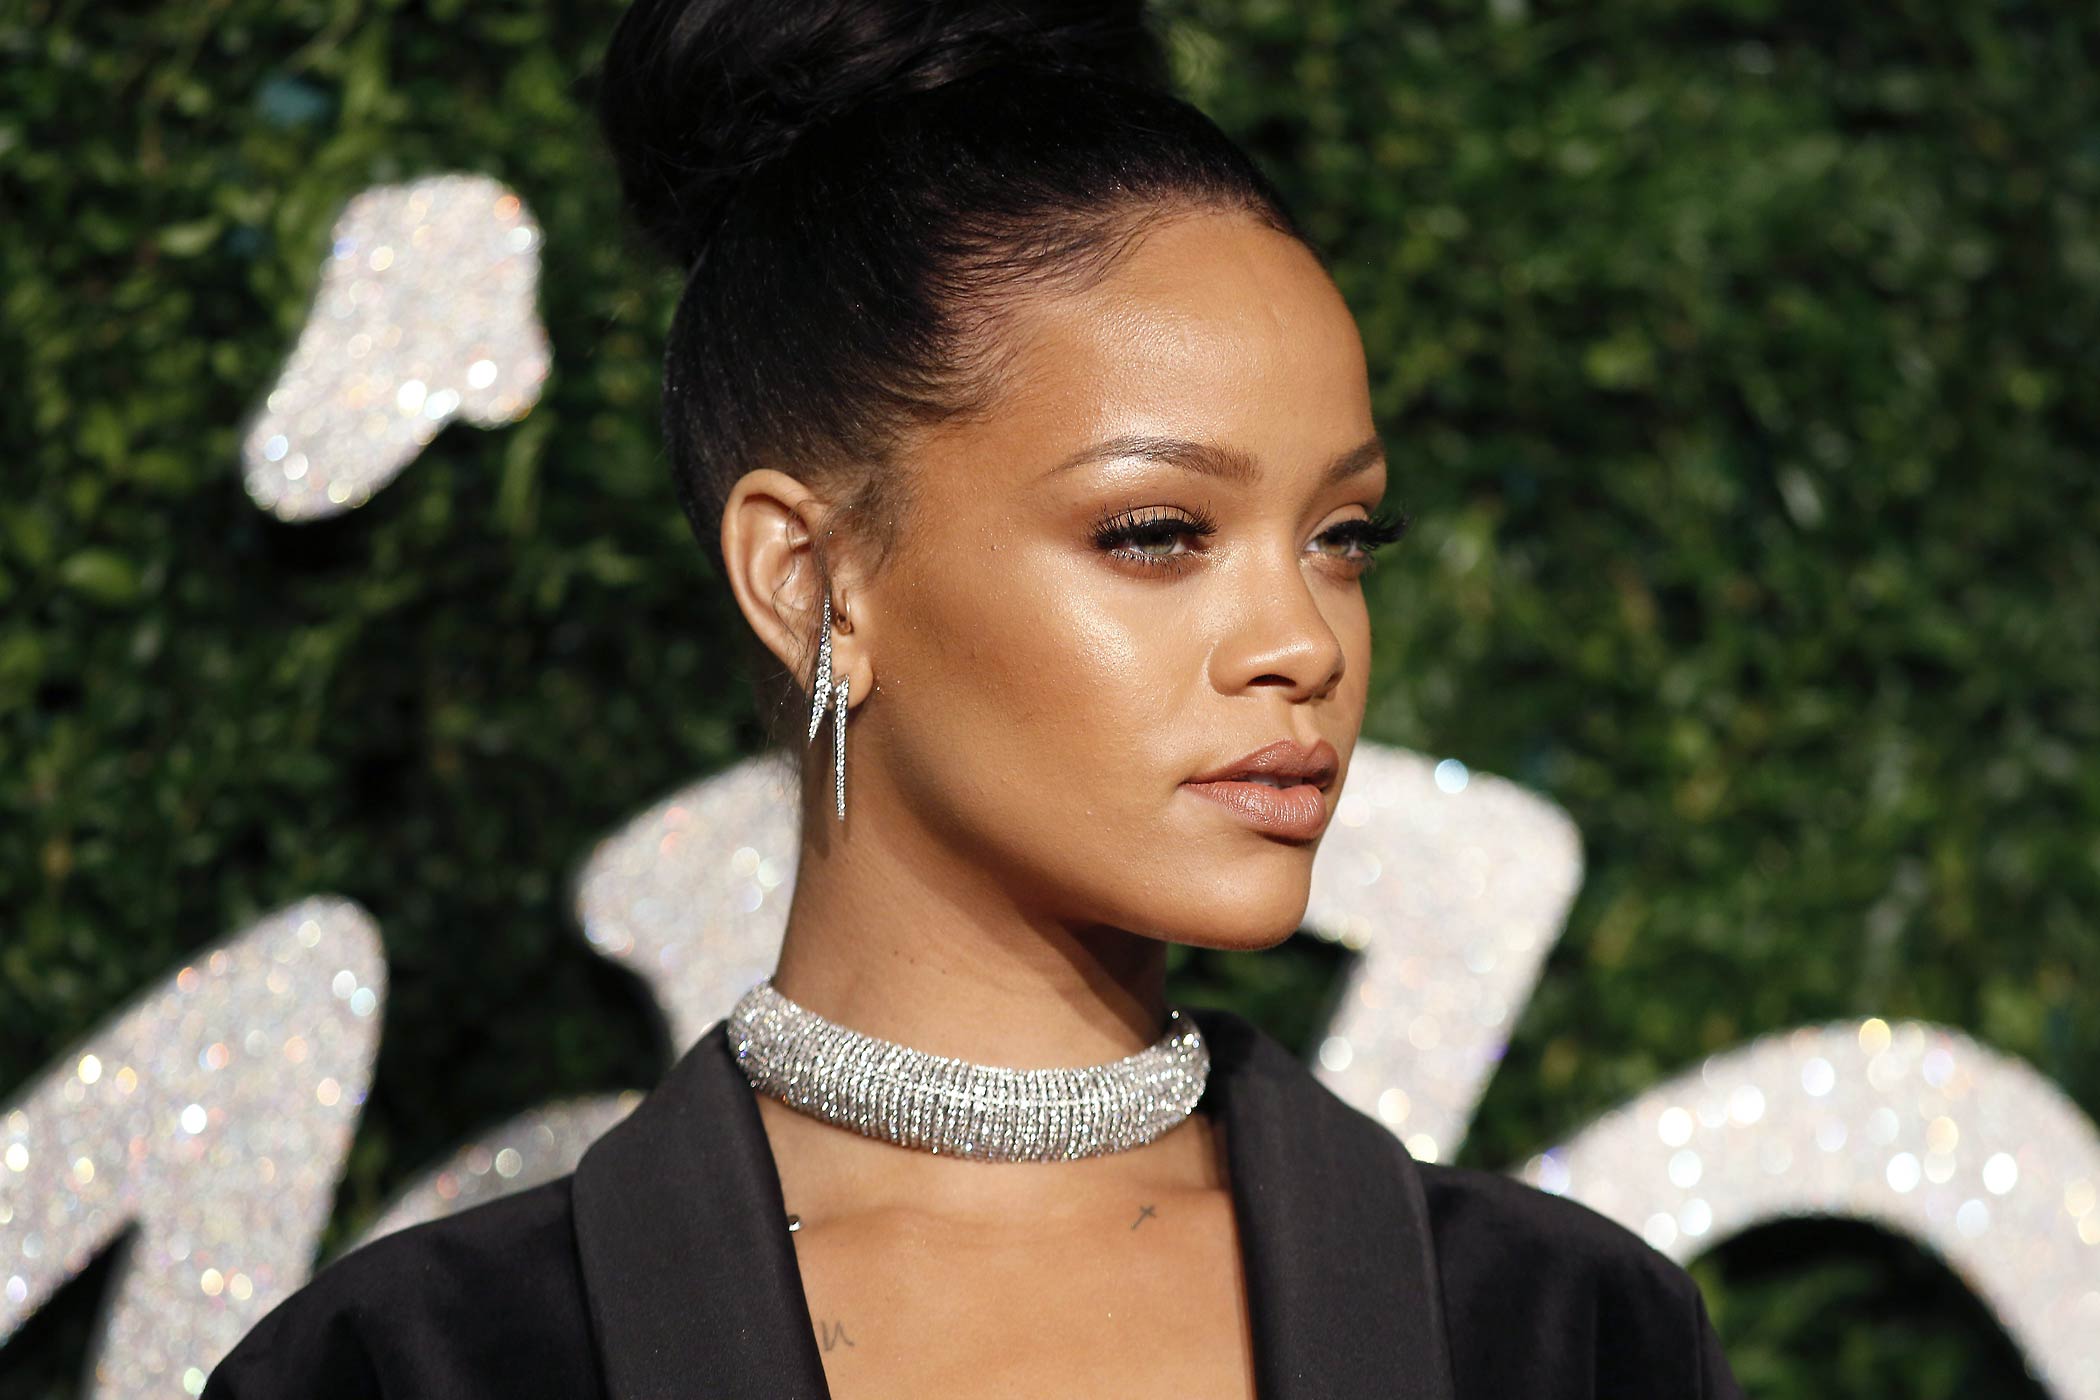 Rihanna arrives at the British Fashion Awards 2014 in London on Dec. 1, 2014. (Justin Tallis—AFP/Getty Images)